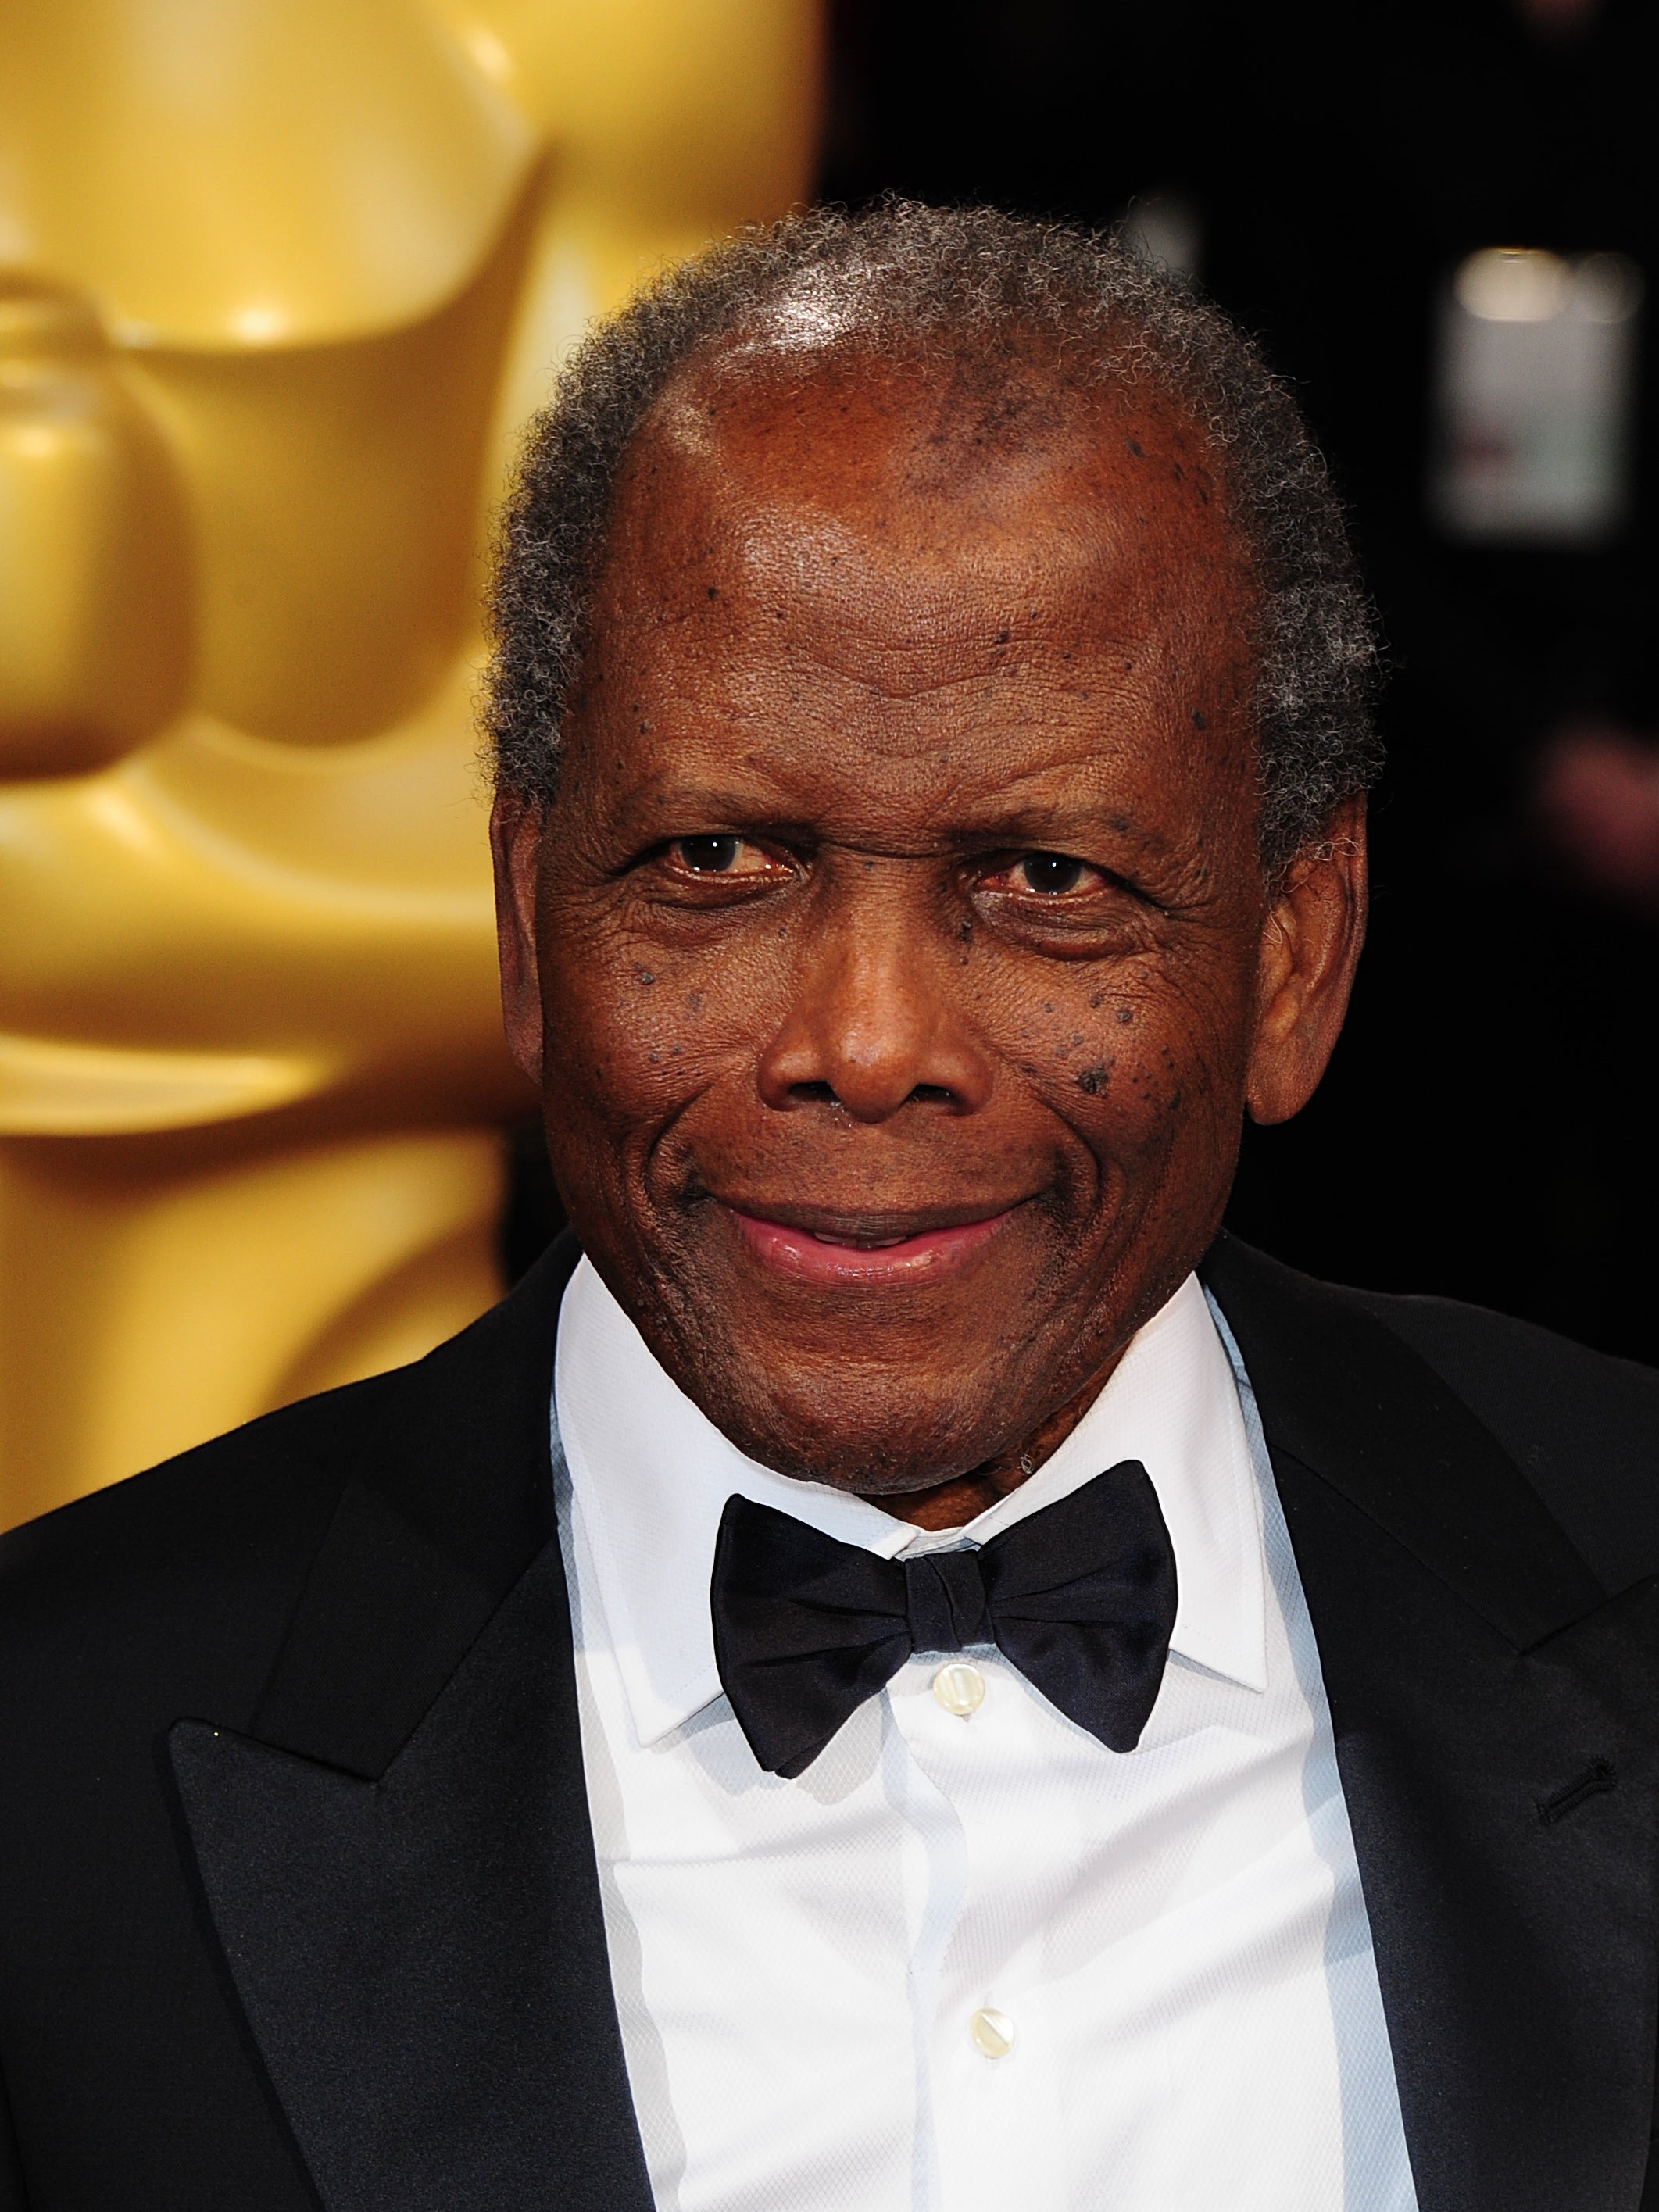 Biden and Harris join tributes to ‘once-in-a-generation’ actor Sidney Poitier (Ian West/PA)